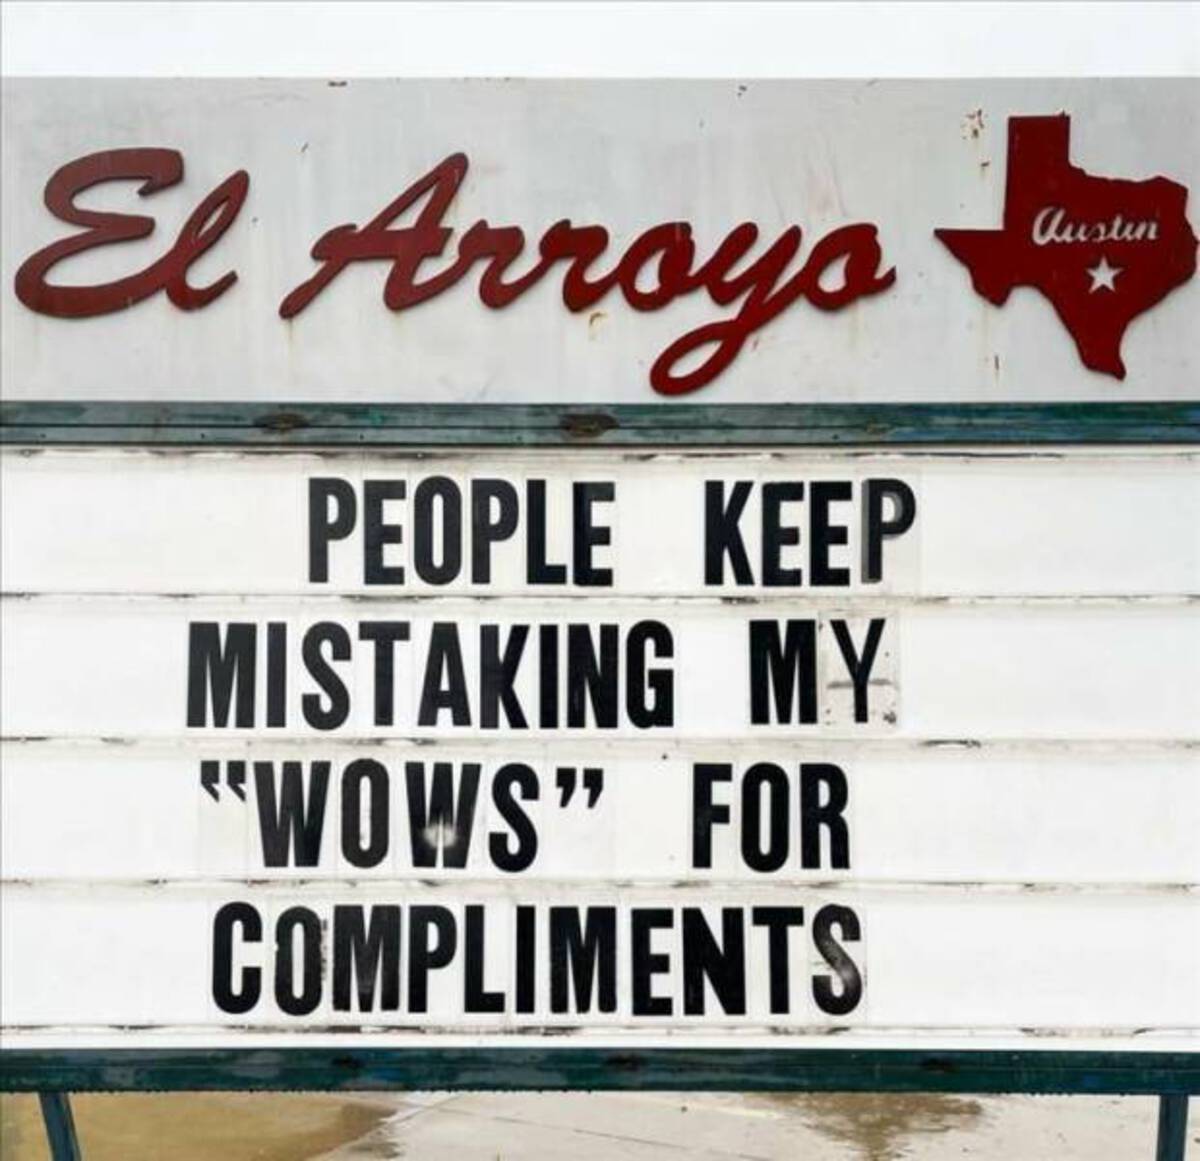 street sign - El Arroyo People Keep Mistaking My "Wows" For Compliments Austin